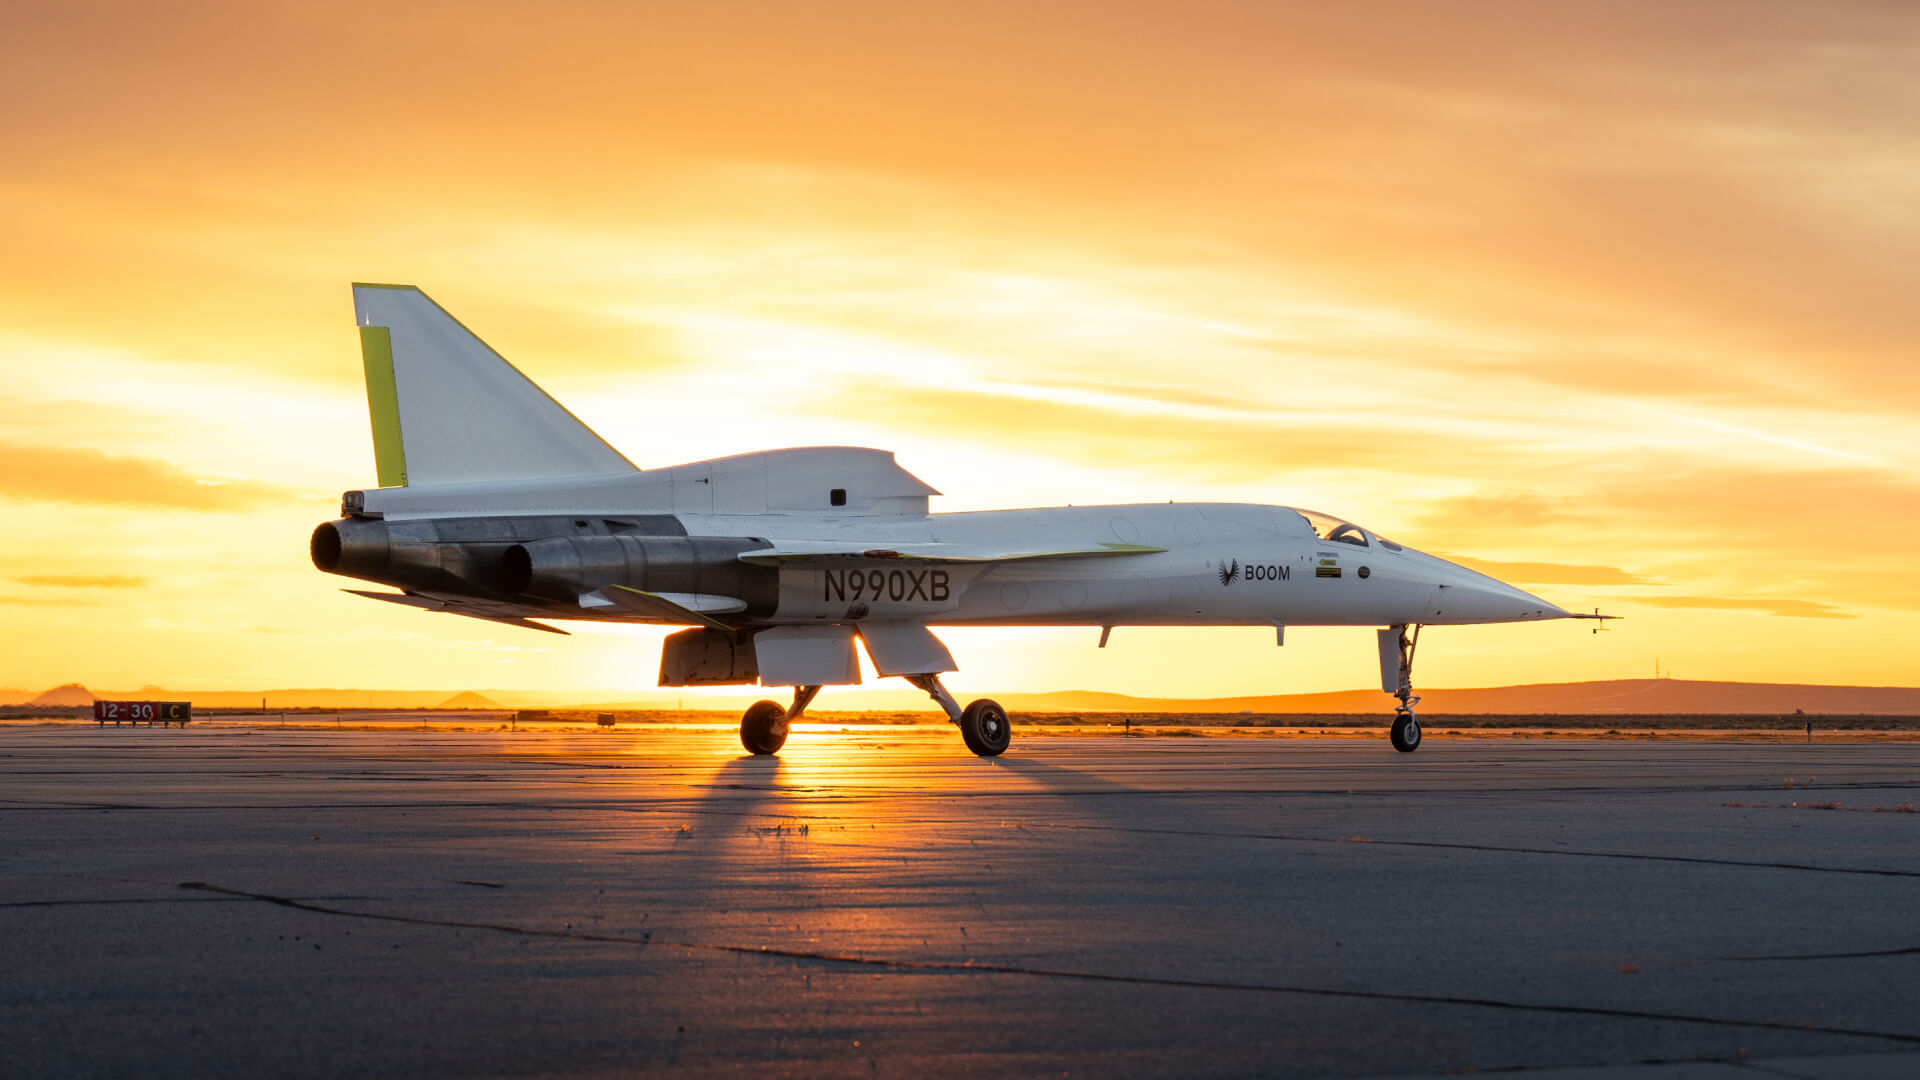 A white jet aircraft parked in front of a setting sun